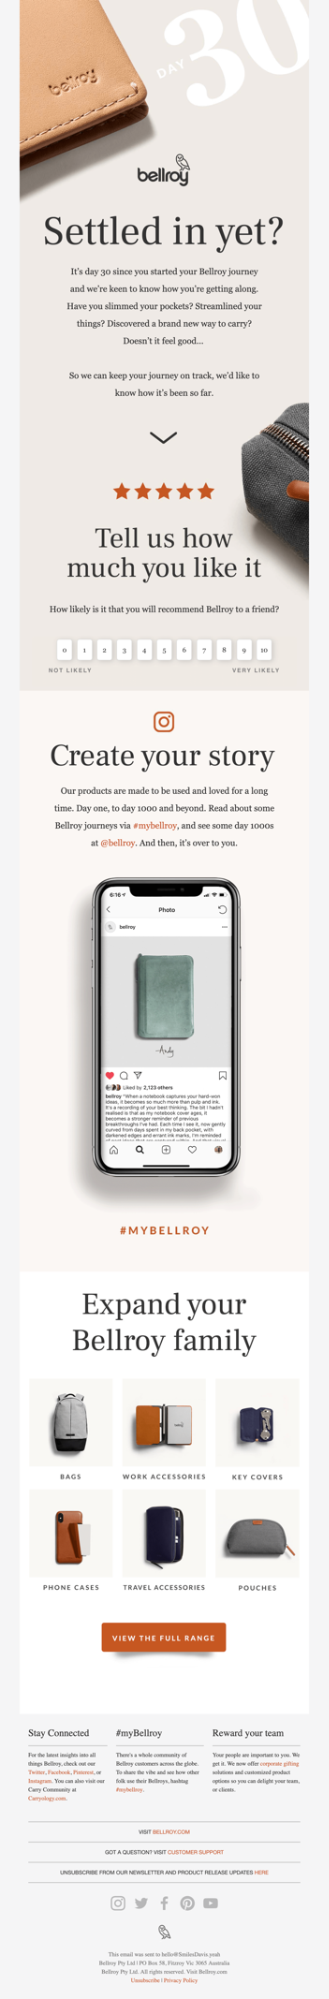 Automated Email From Bellroy Asking for Feedback From the Subscriber